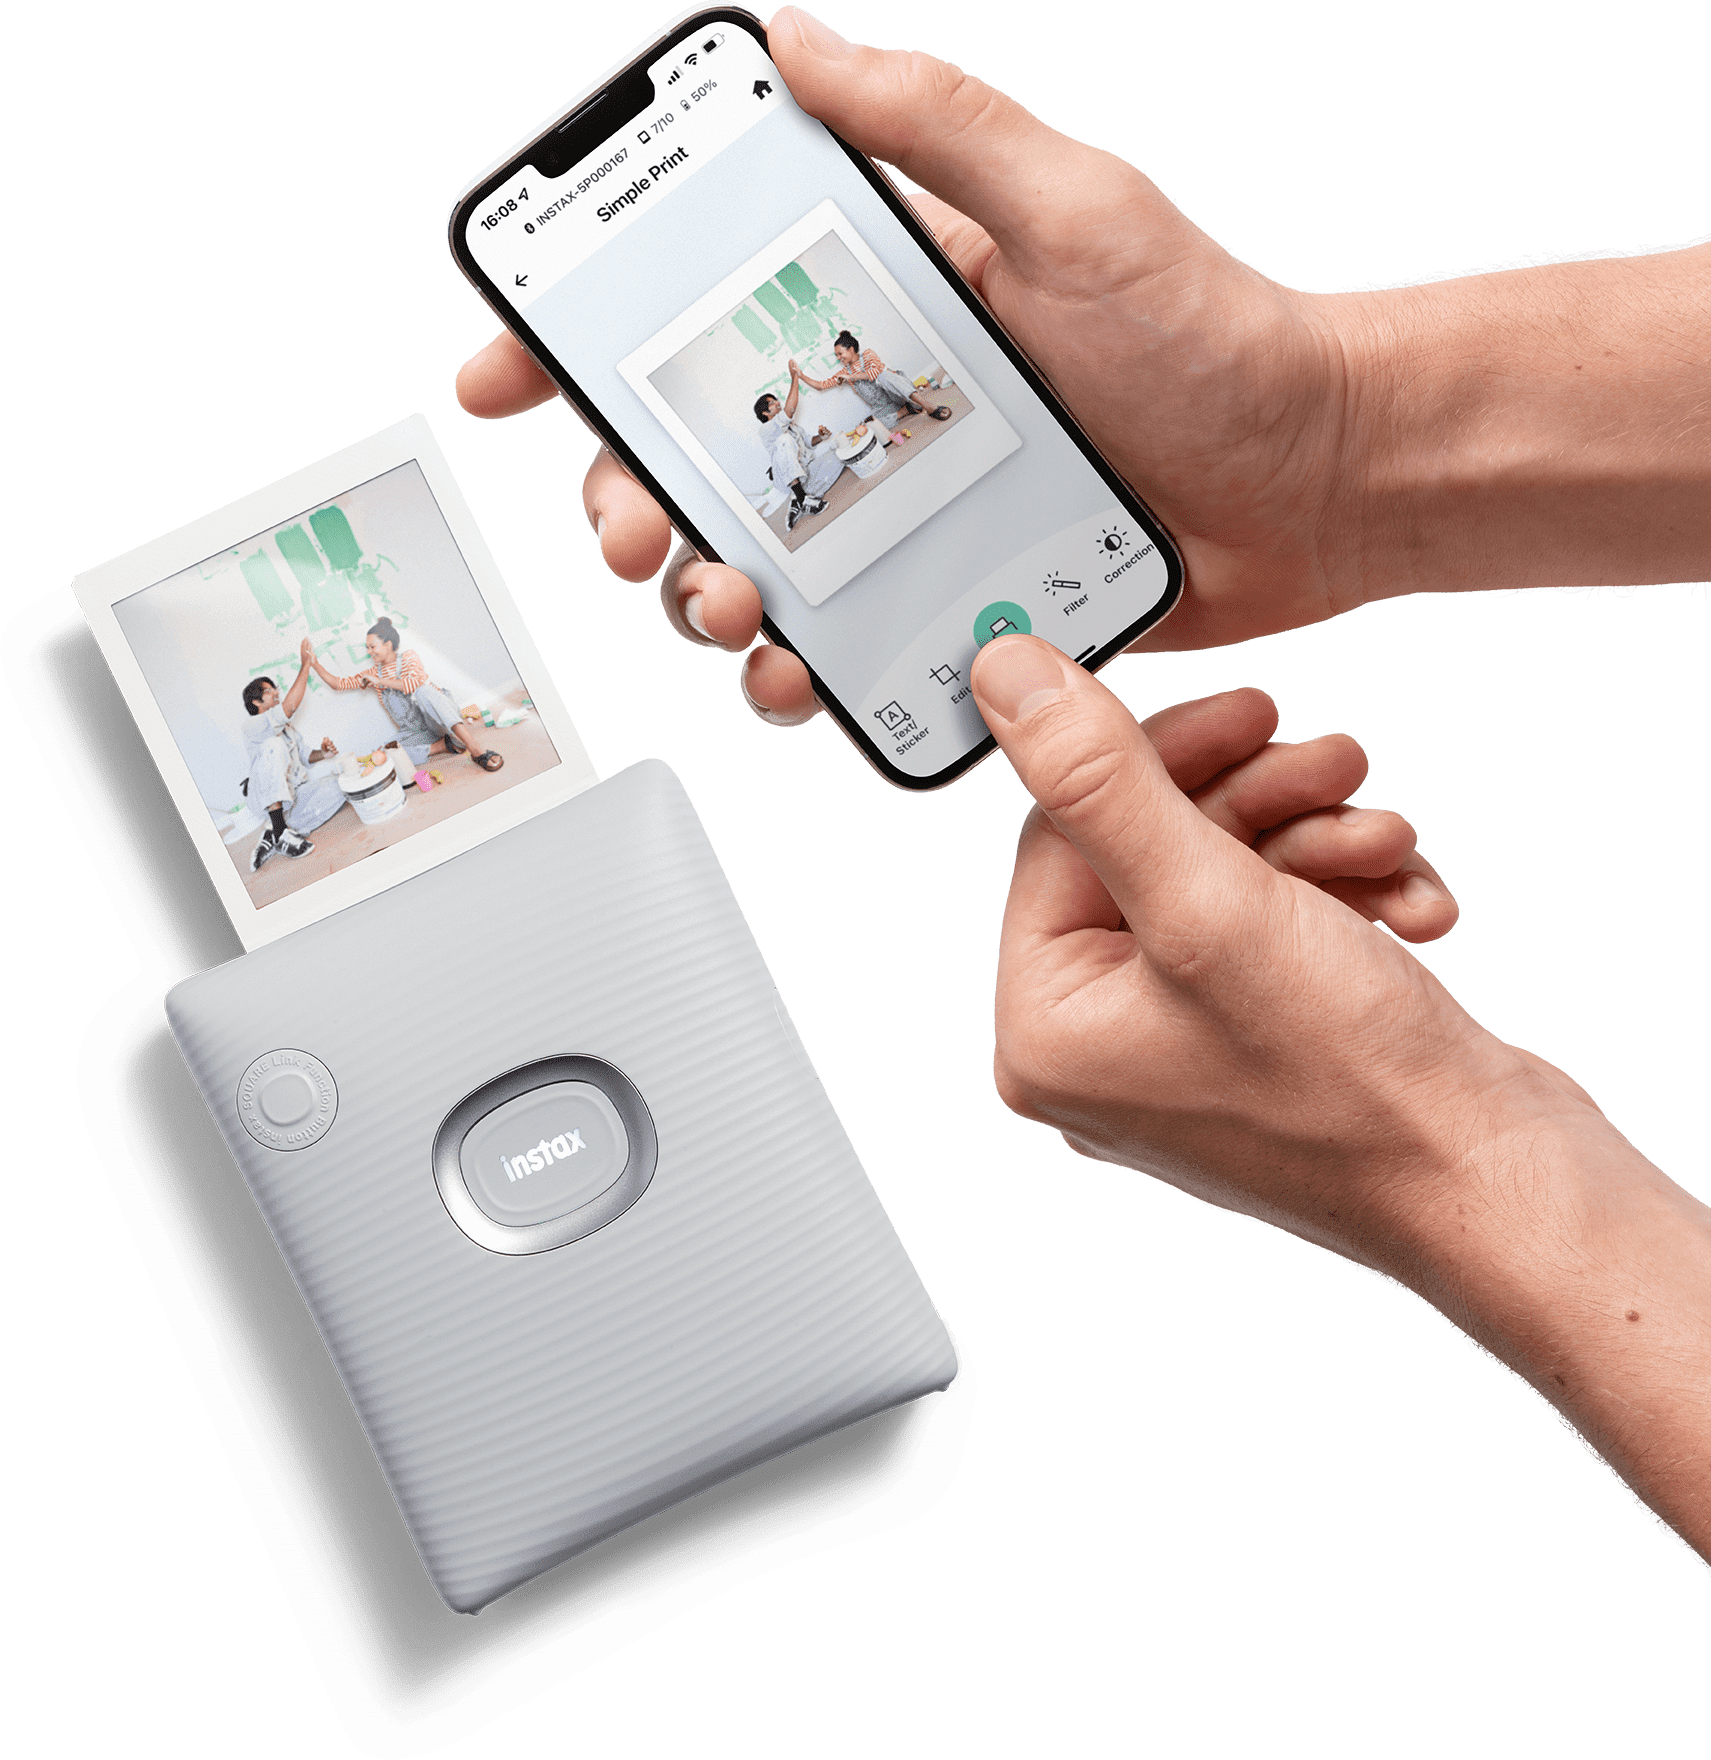 instax SQUARE Link Ash White